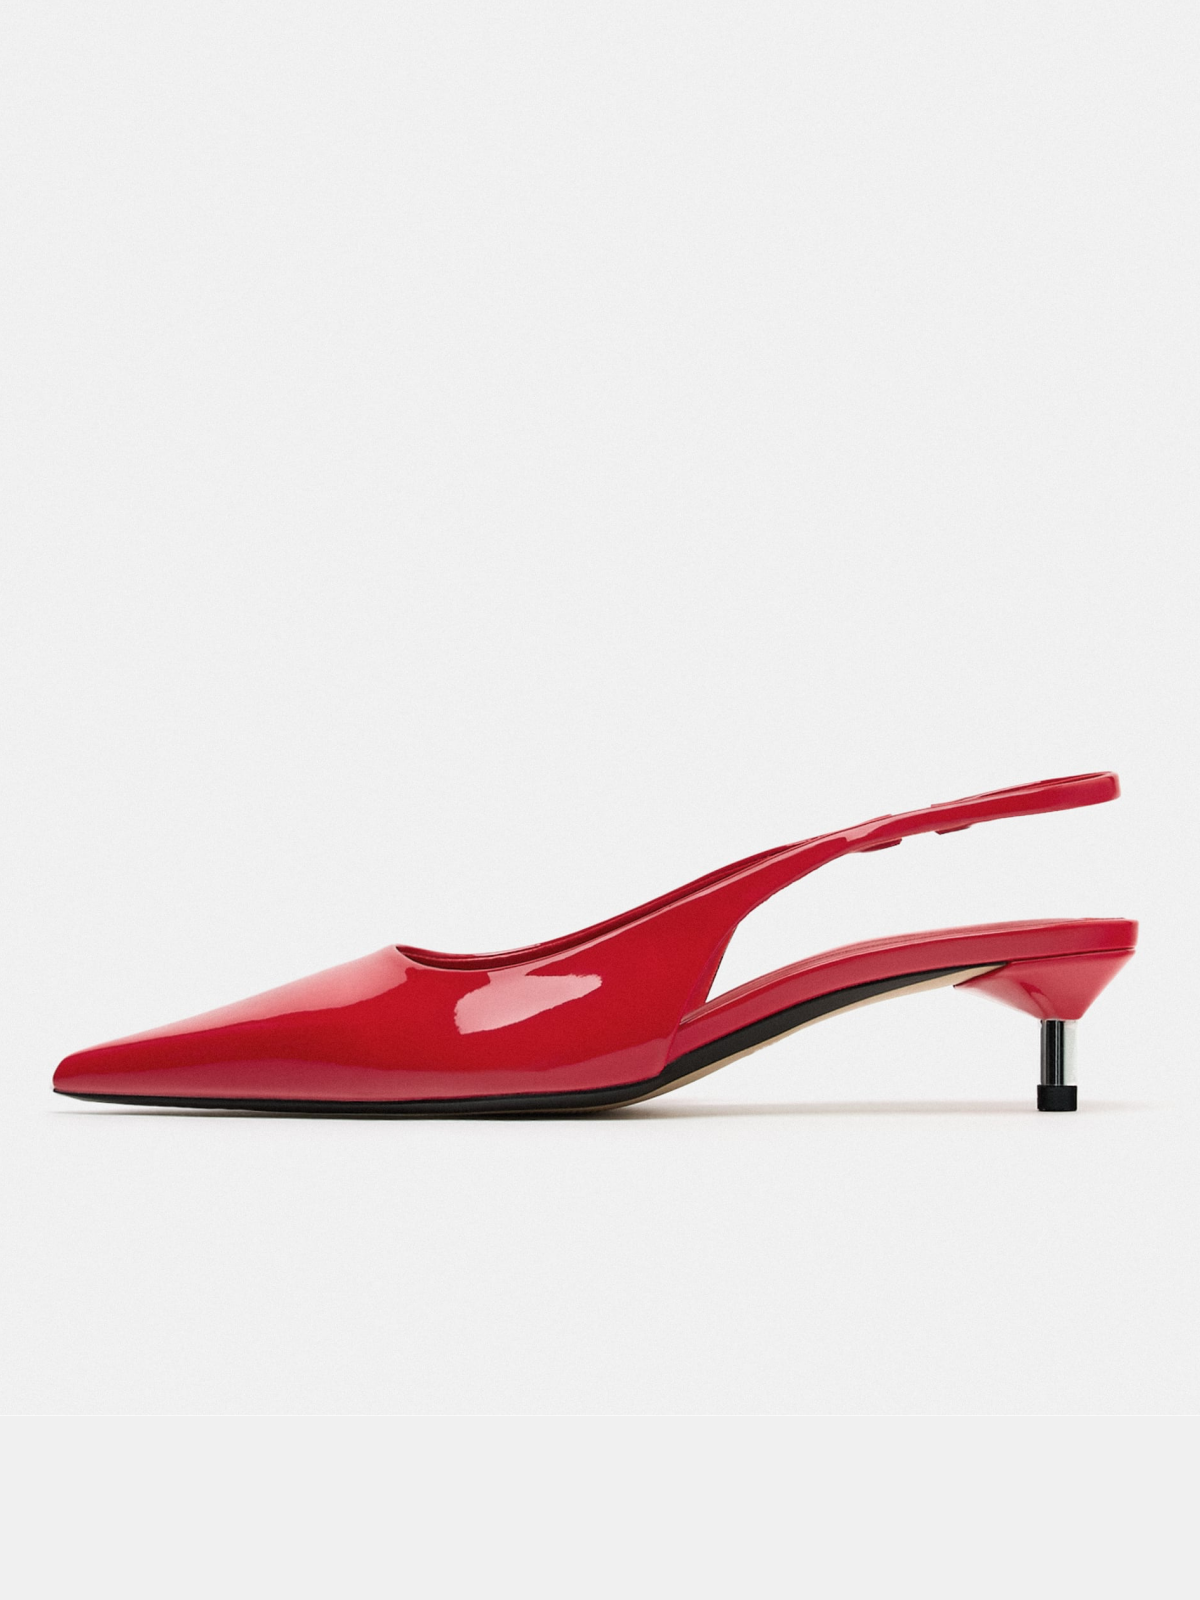 Red Pointy Comfy Kitten Heels Slingback Pumps For Women